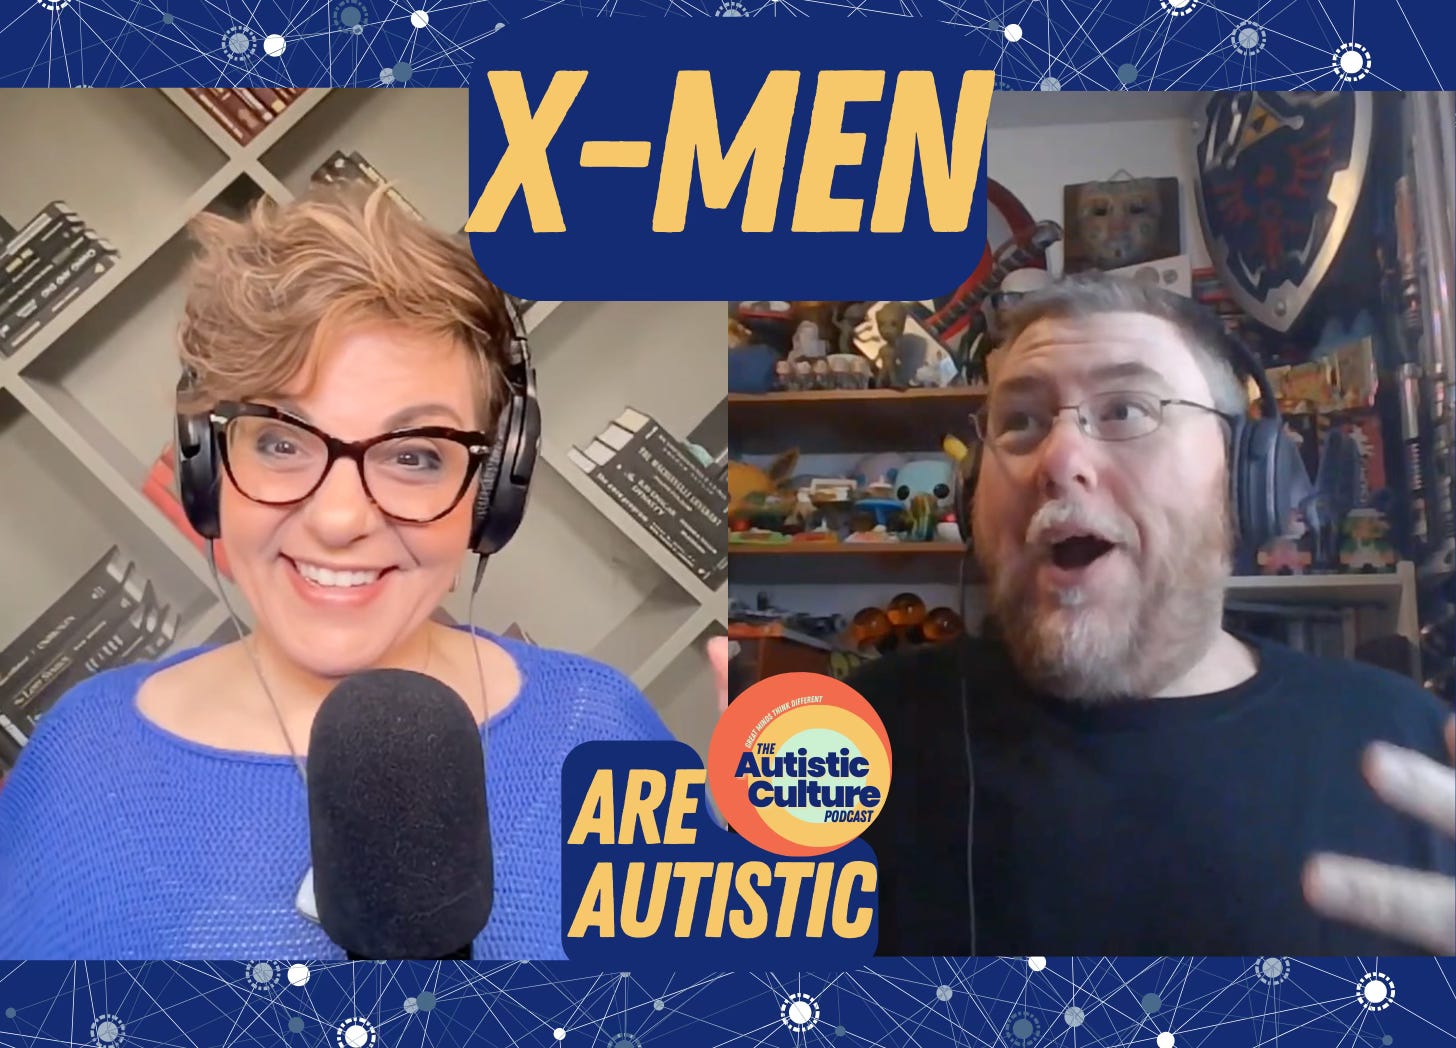 two autistic podcast hosts, Dr. Angela Lauria and Matt Lowry, LPP discuss the title topic: x-men are autistic